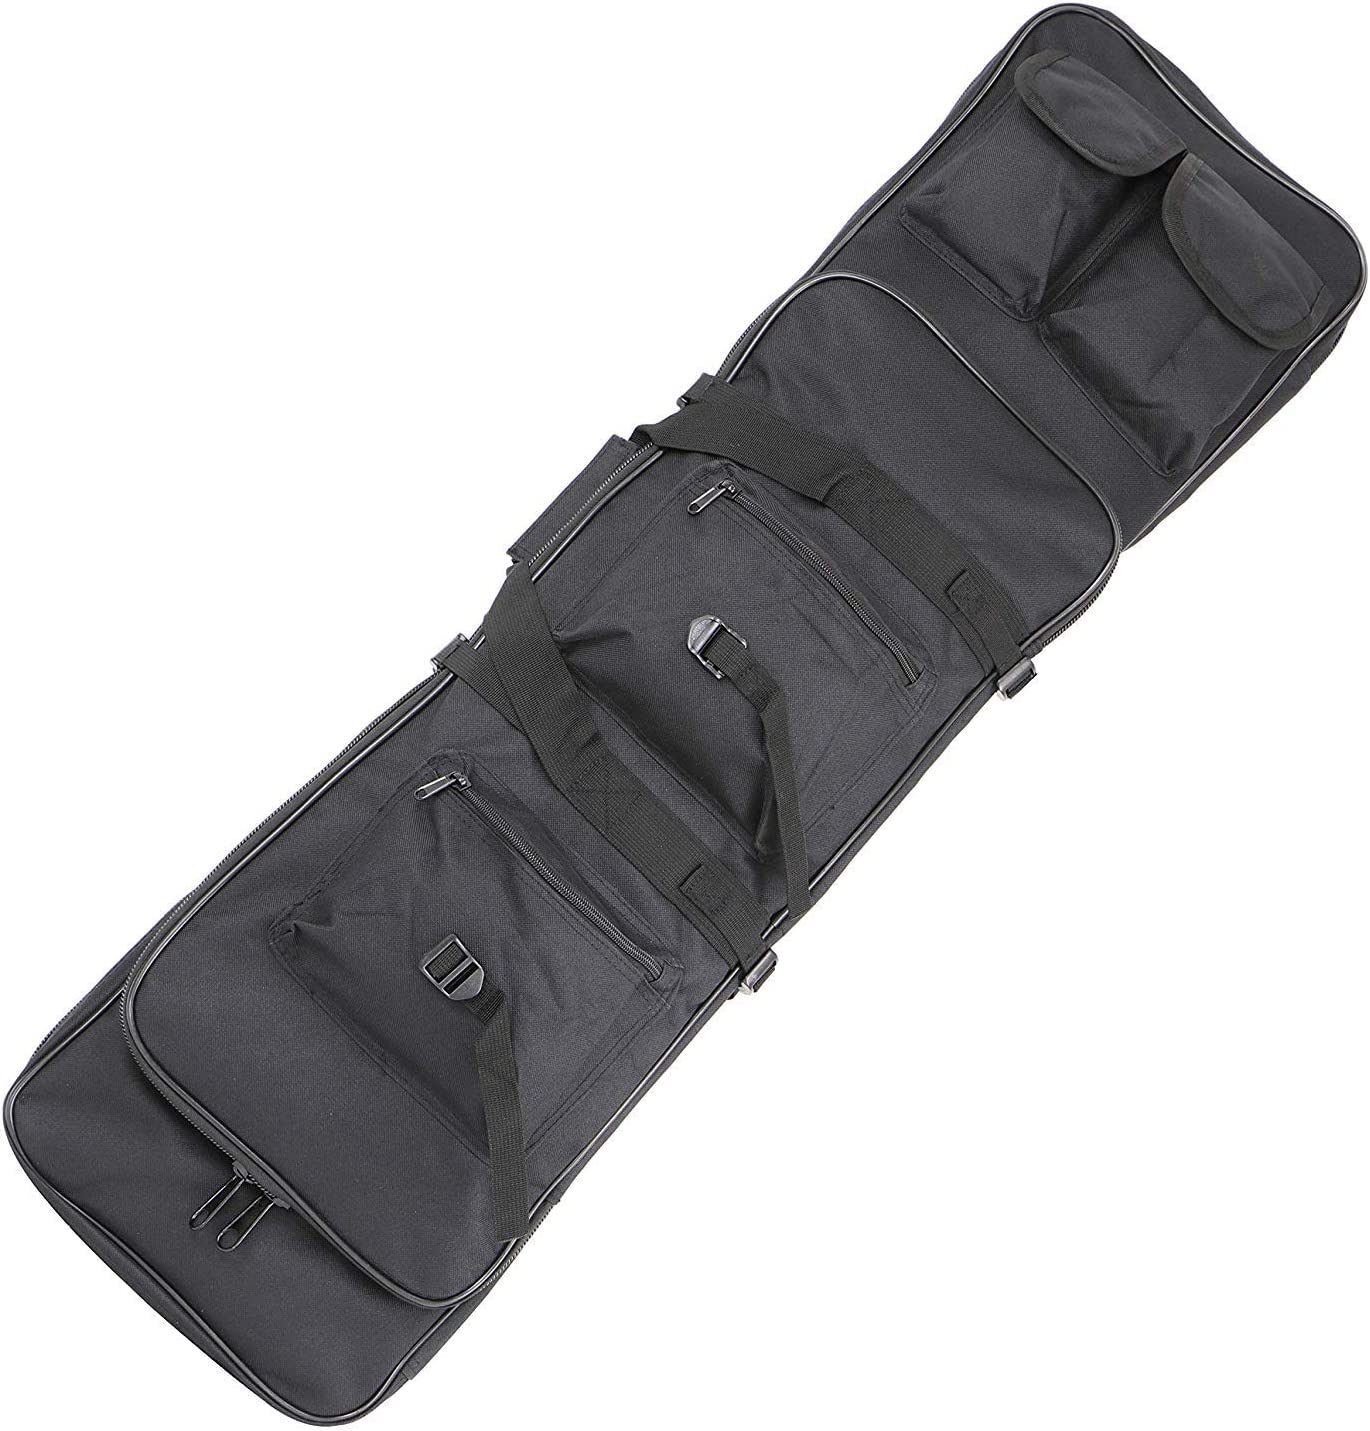 Tactical Double Gun Case, Rifle Case, Padded Rifle Storage Backpack Integrated Pistol and Magazine Storage